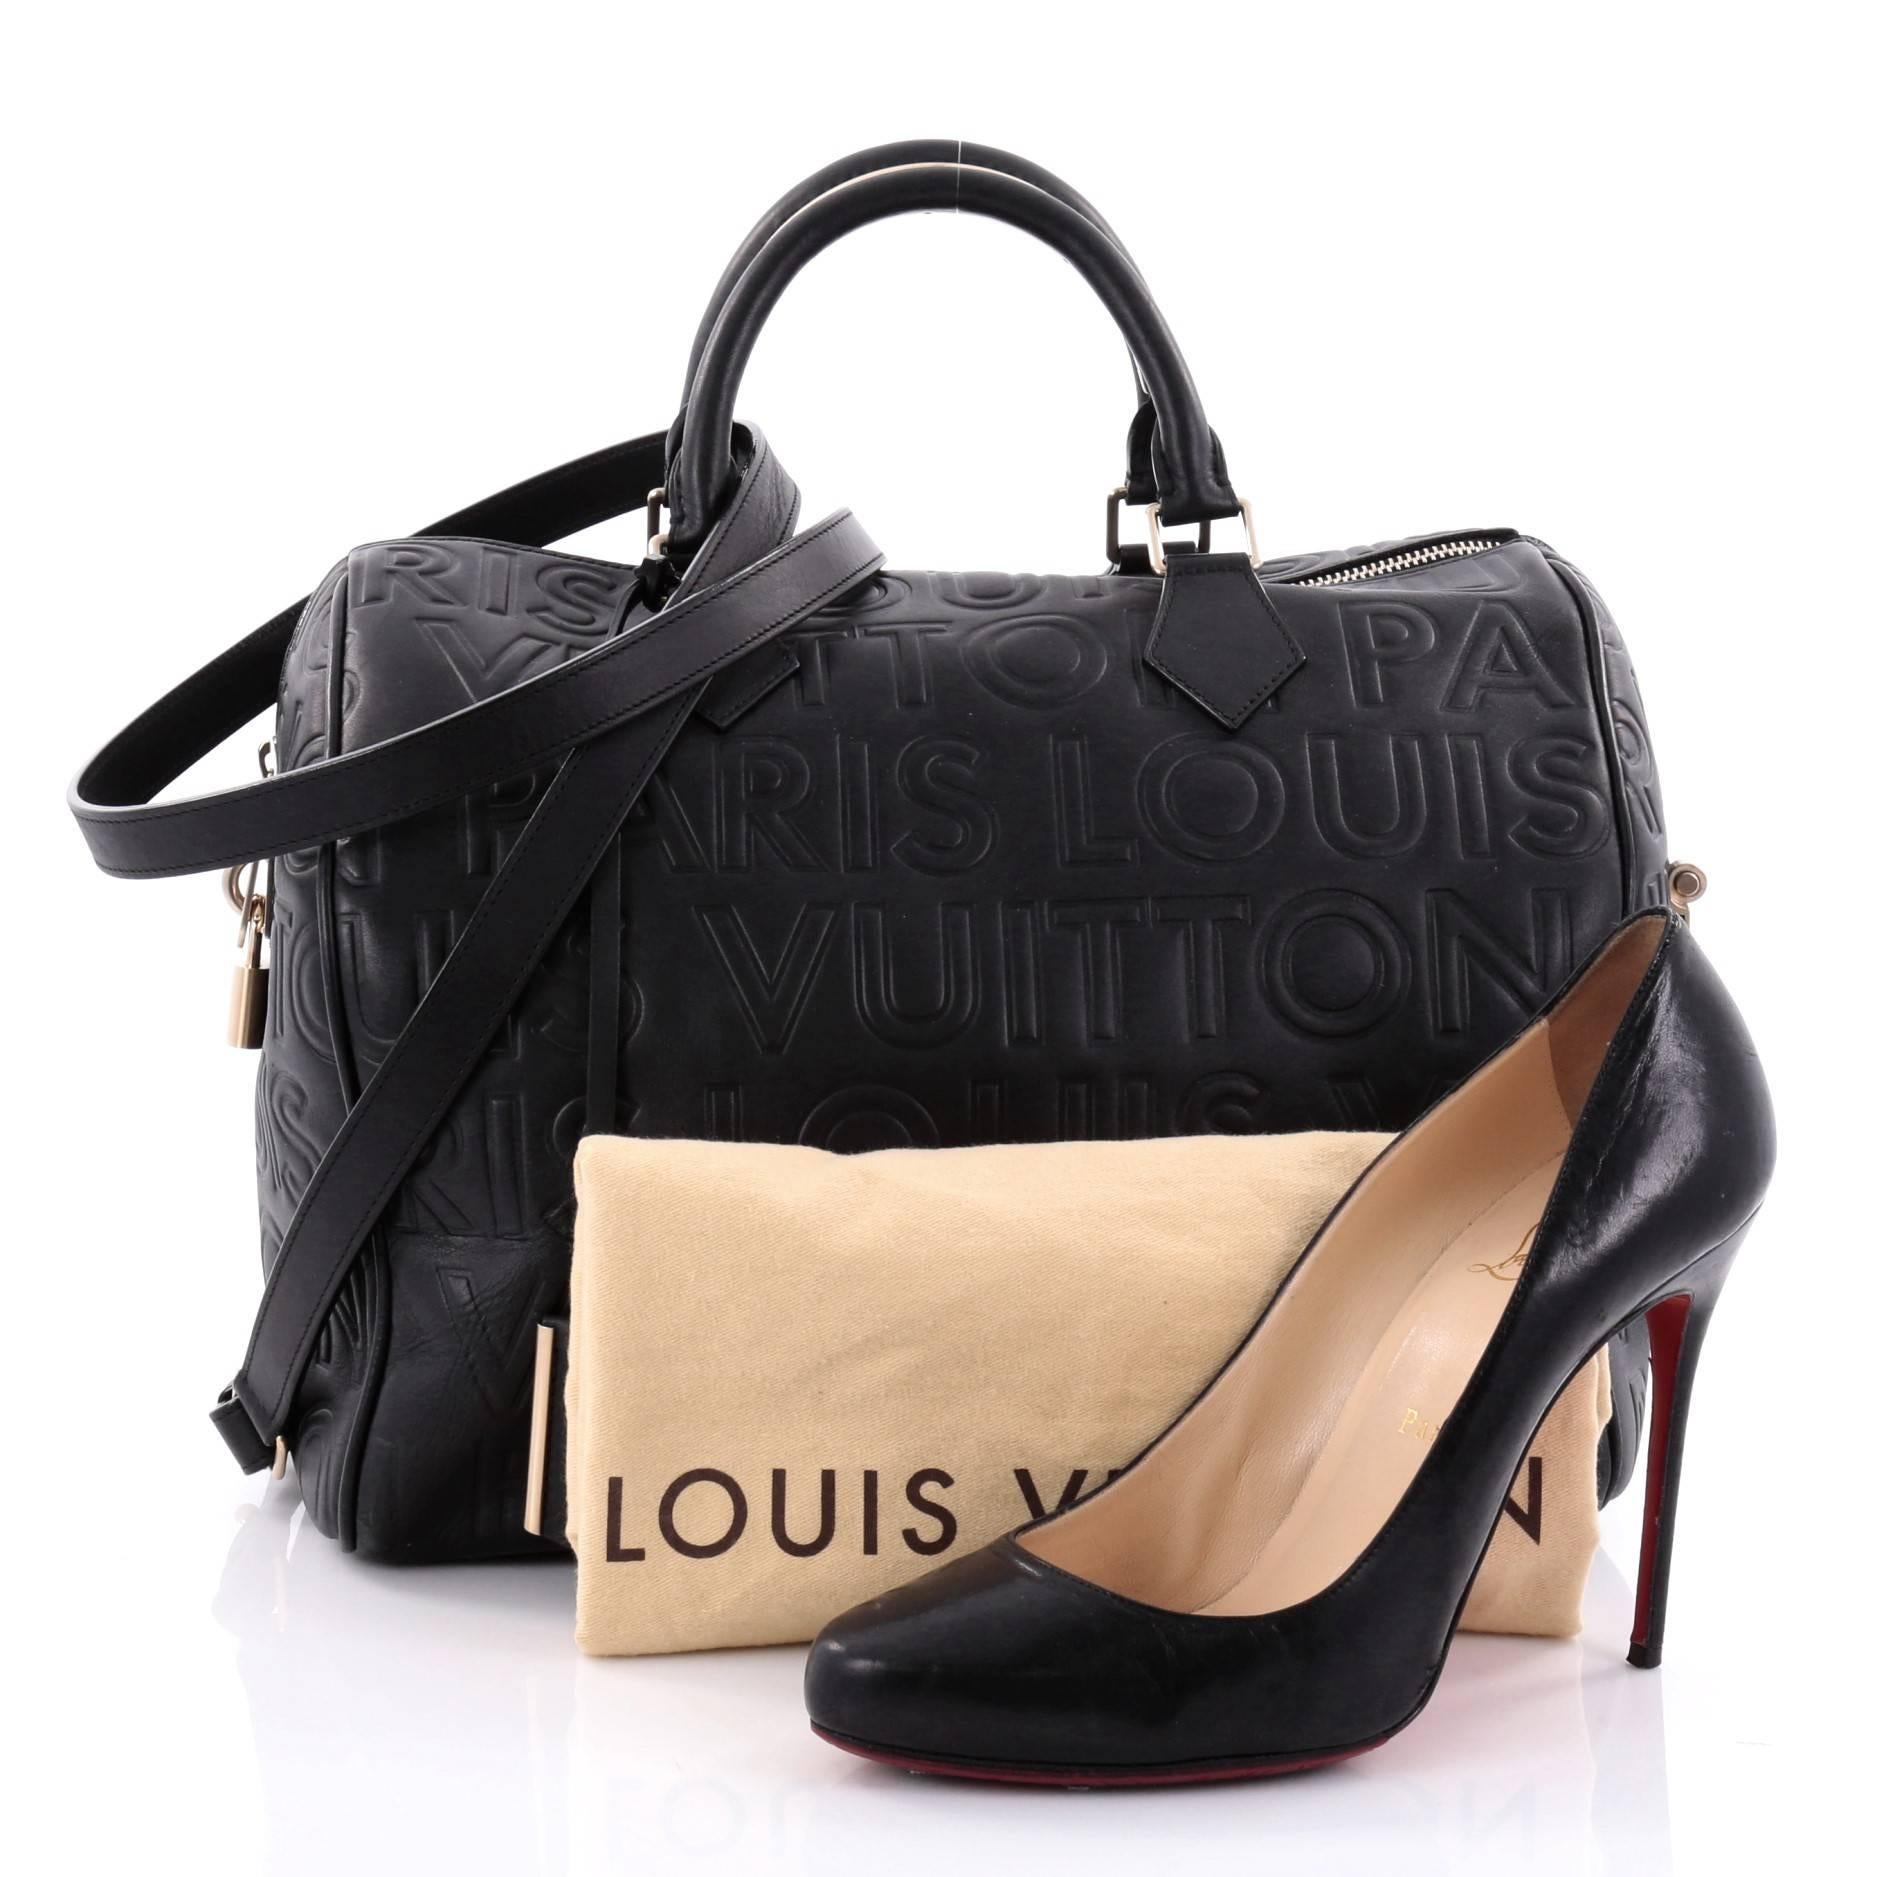 This authentic Louis Vuitton Paris Speedy Cube Bag Embossed Leather 30 presented in the brand's Fall/Winter 2008 Collection updates the classic Speedy with a youthful, edgy style. Crafted from supple black leather, this Speedy features embossed